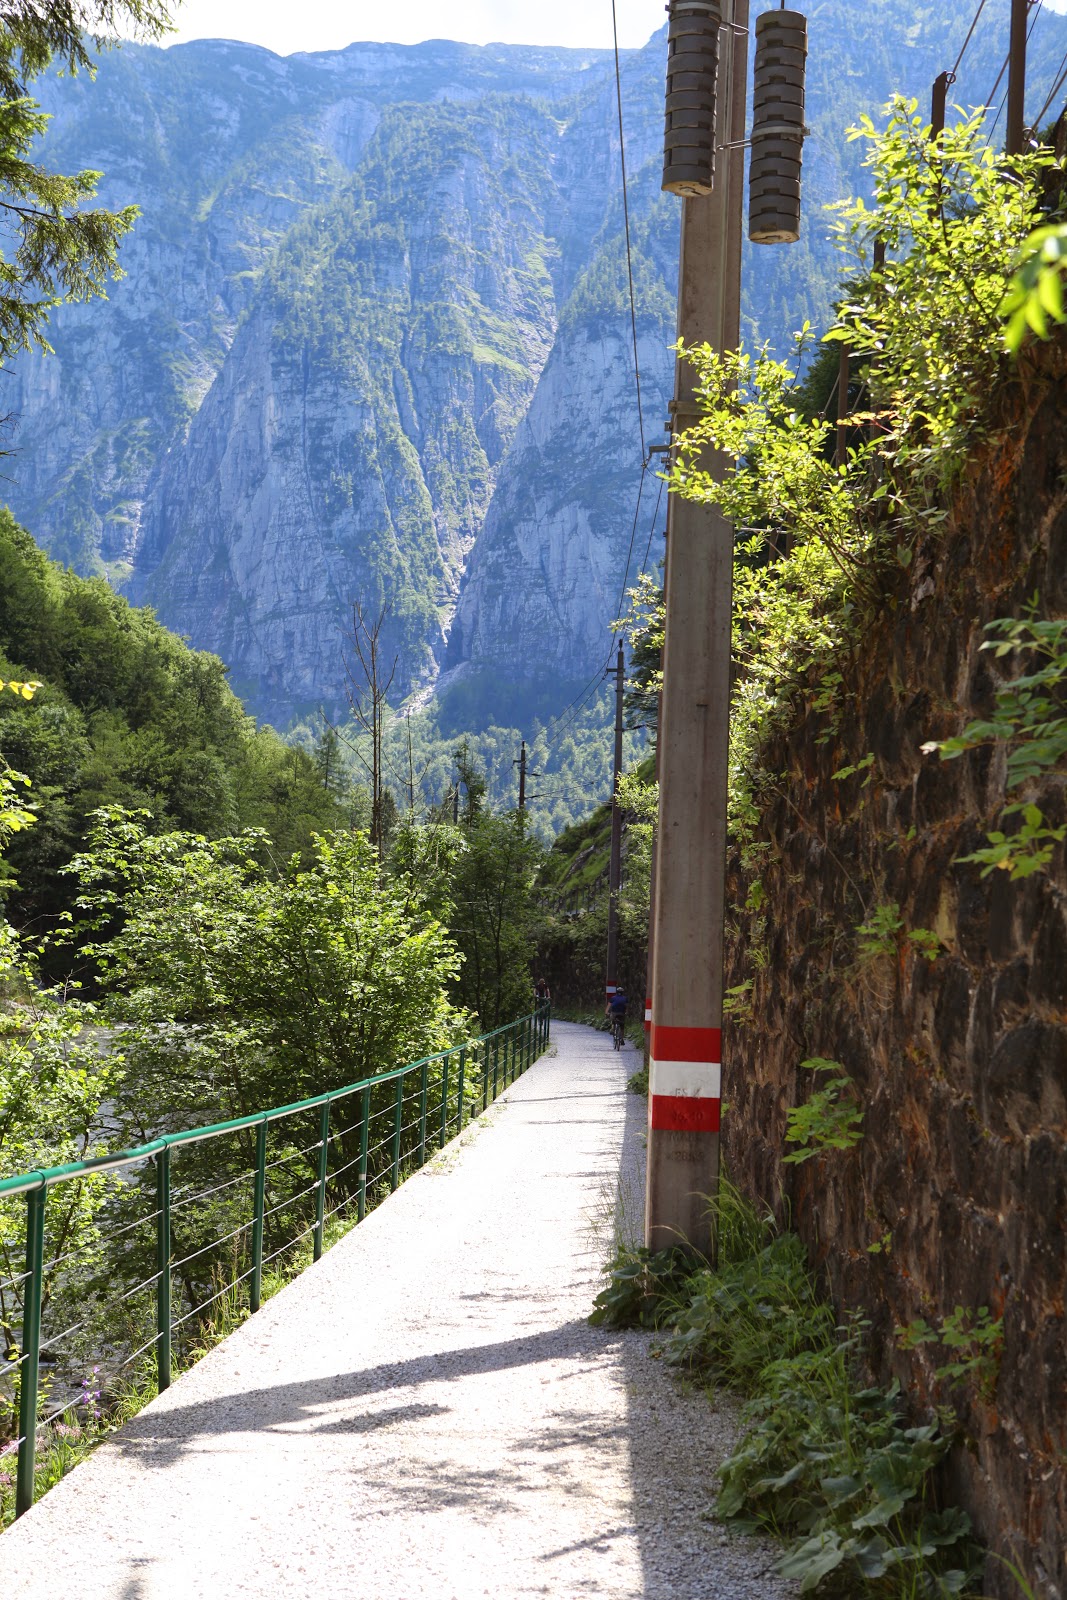 Cycling down to Obertraun through the gorge was impressive.